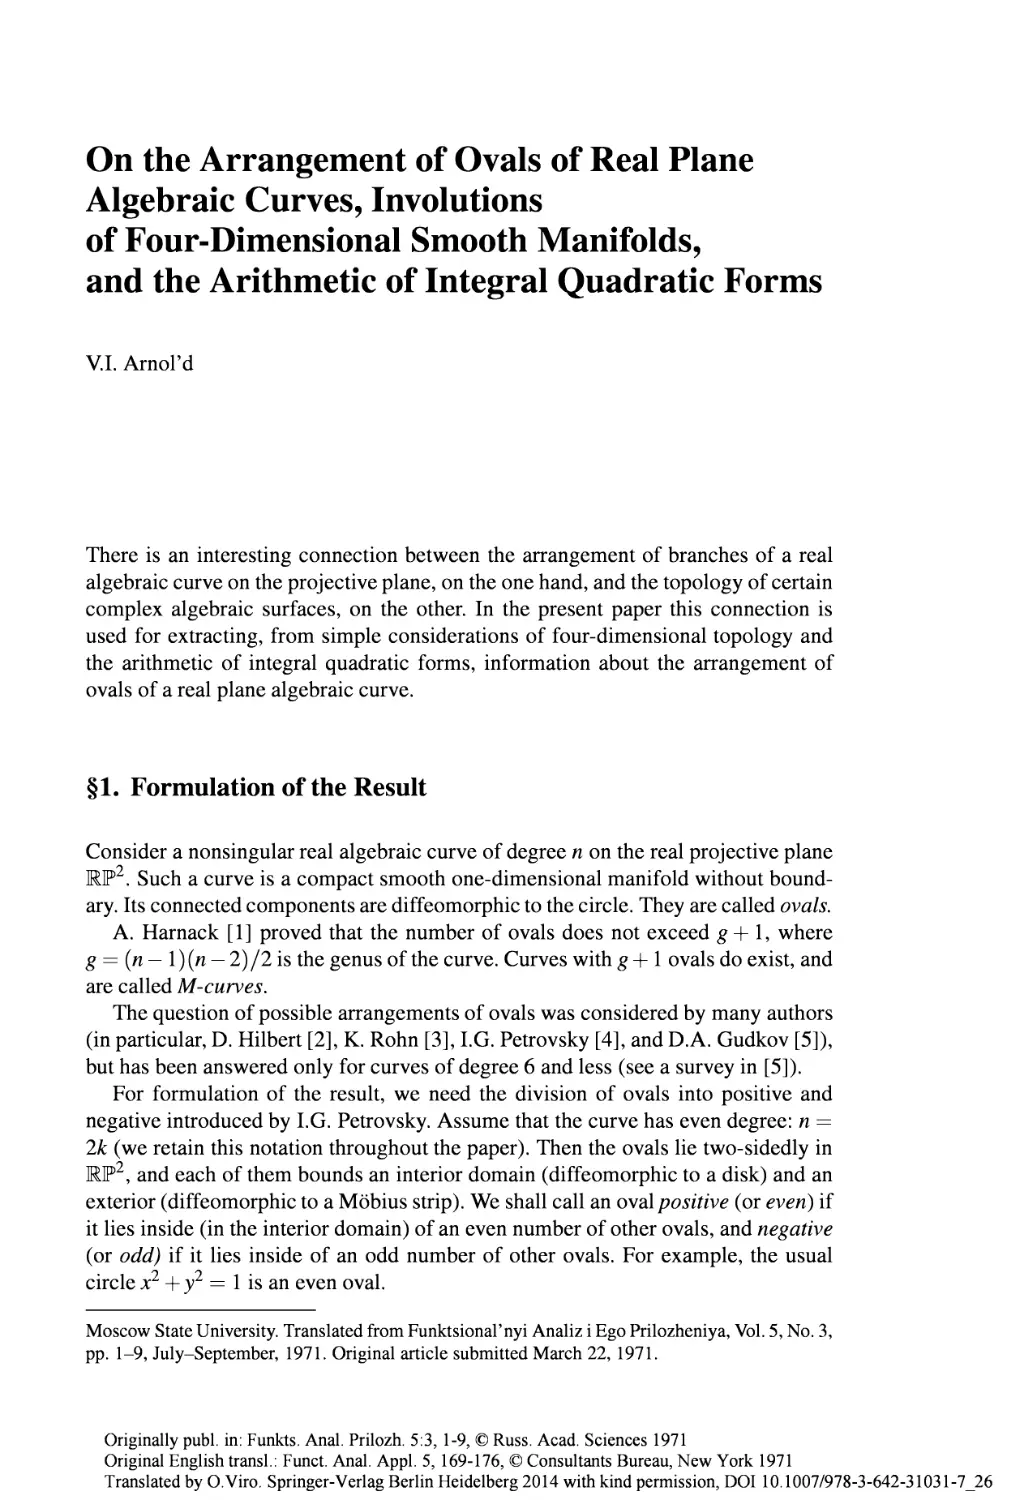 26 On the arrangement of ovals of real plane algebraic curves, involutions of four-dimensional smooth manifolds, and the arithmetic of integral quadratic forms